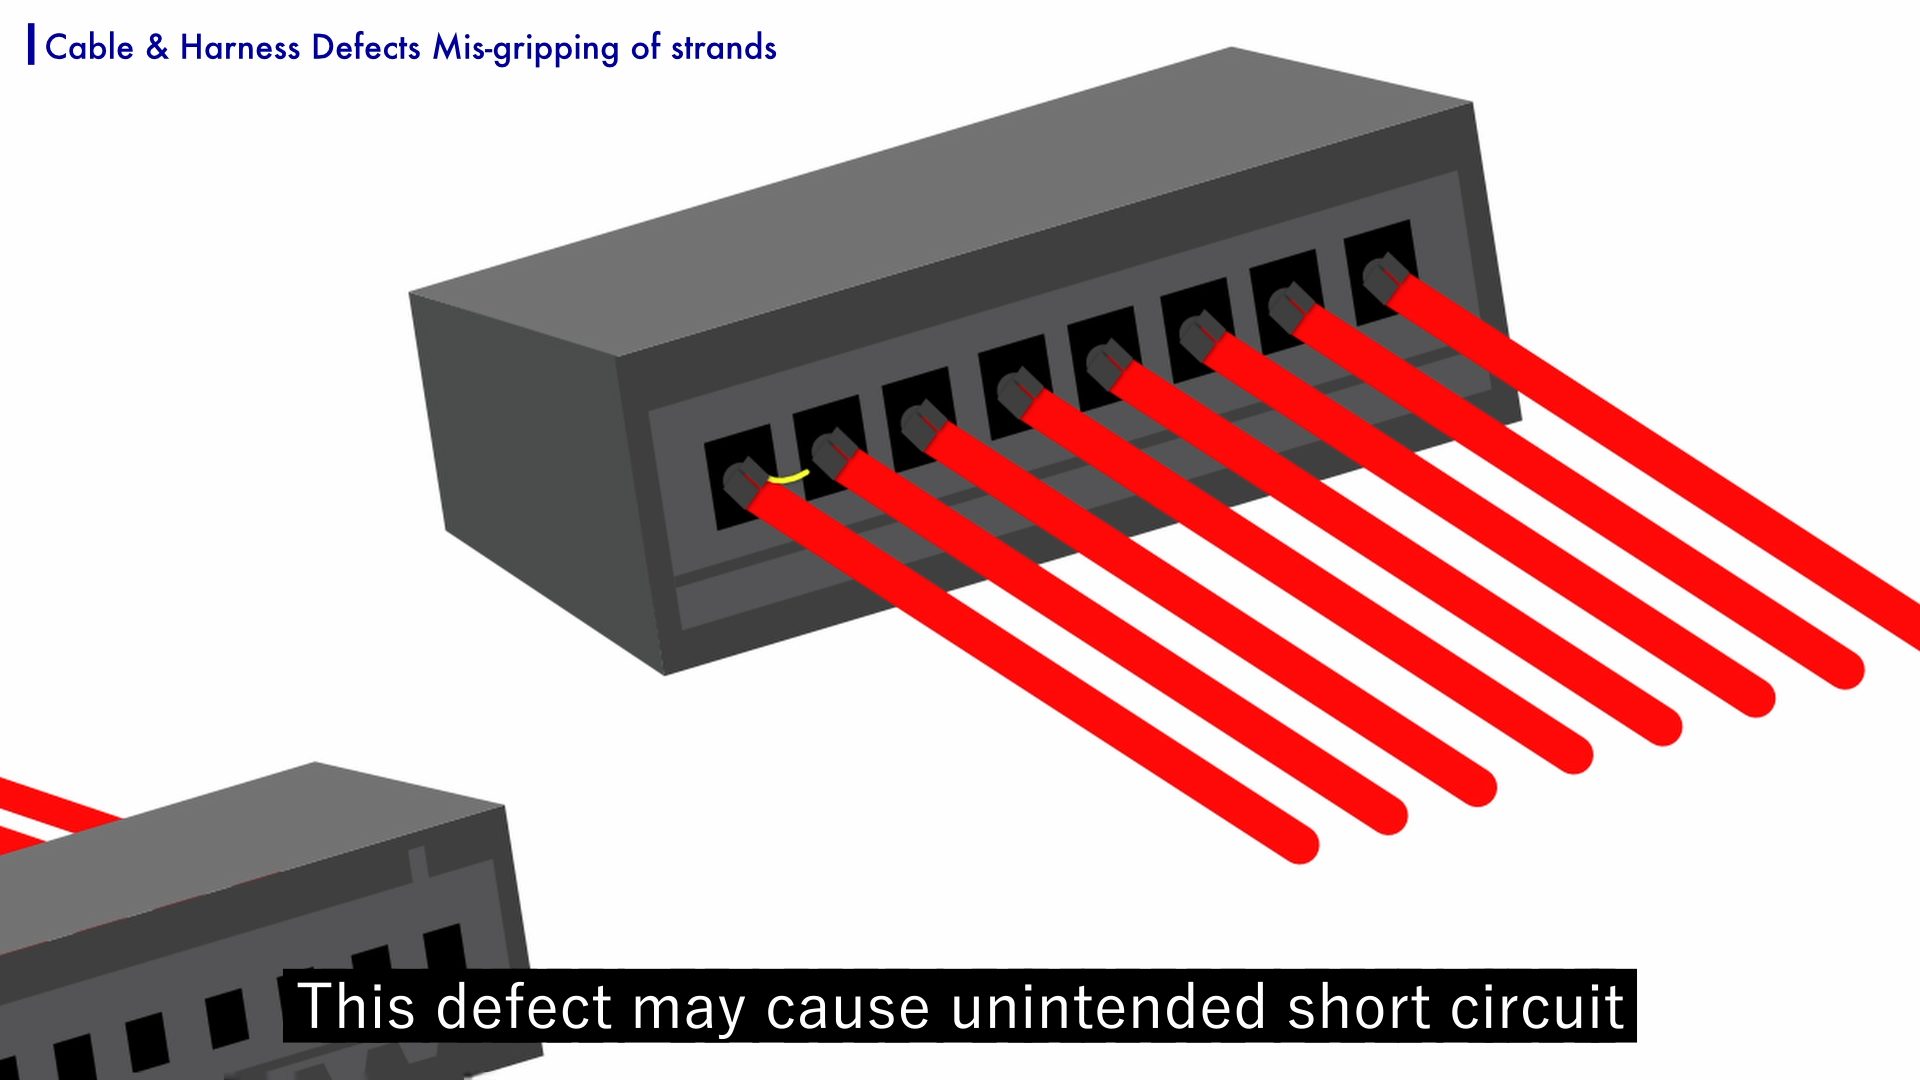 Mis-gripping of strands may cause unintended short circuit